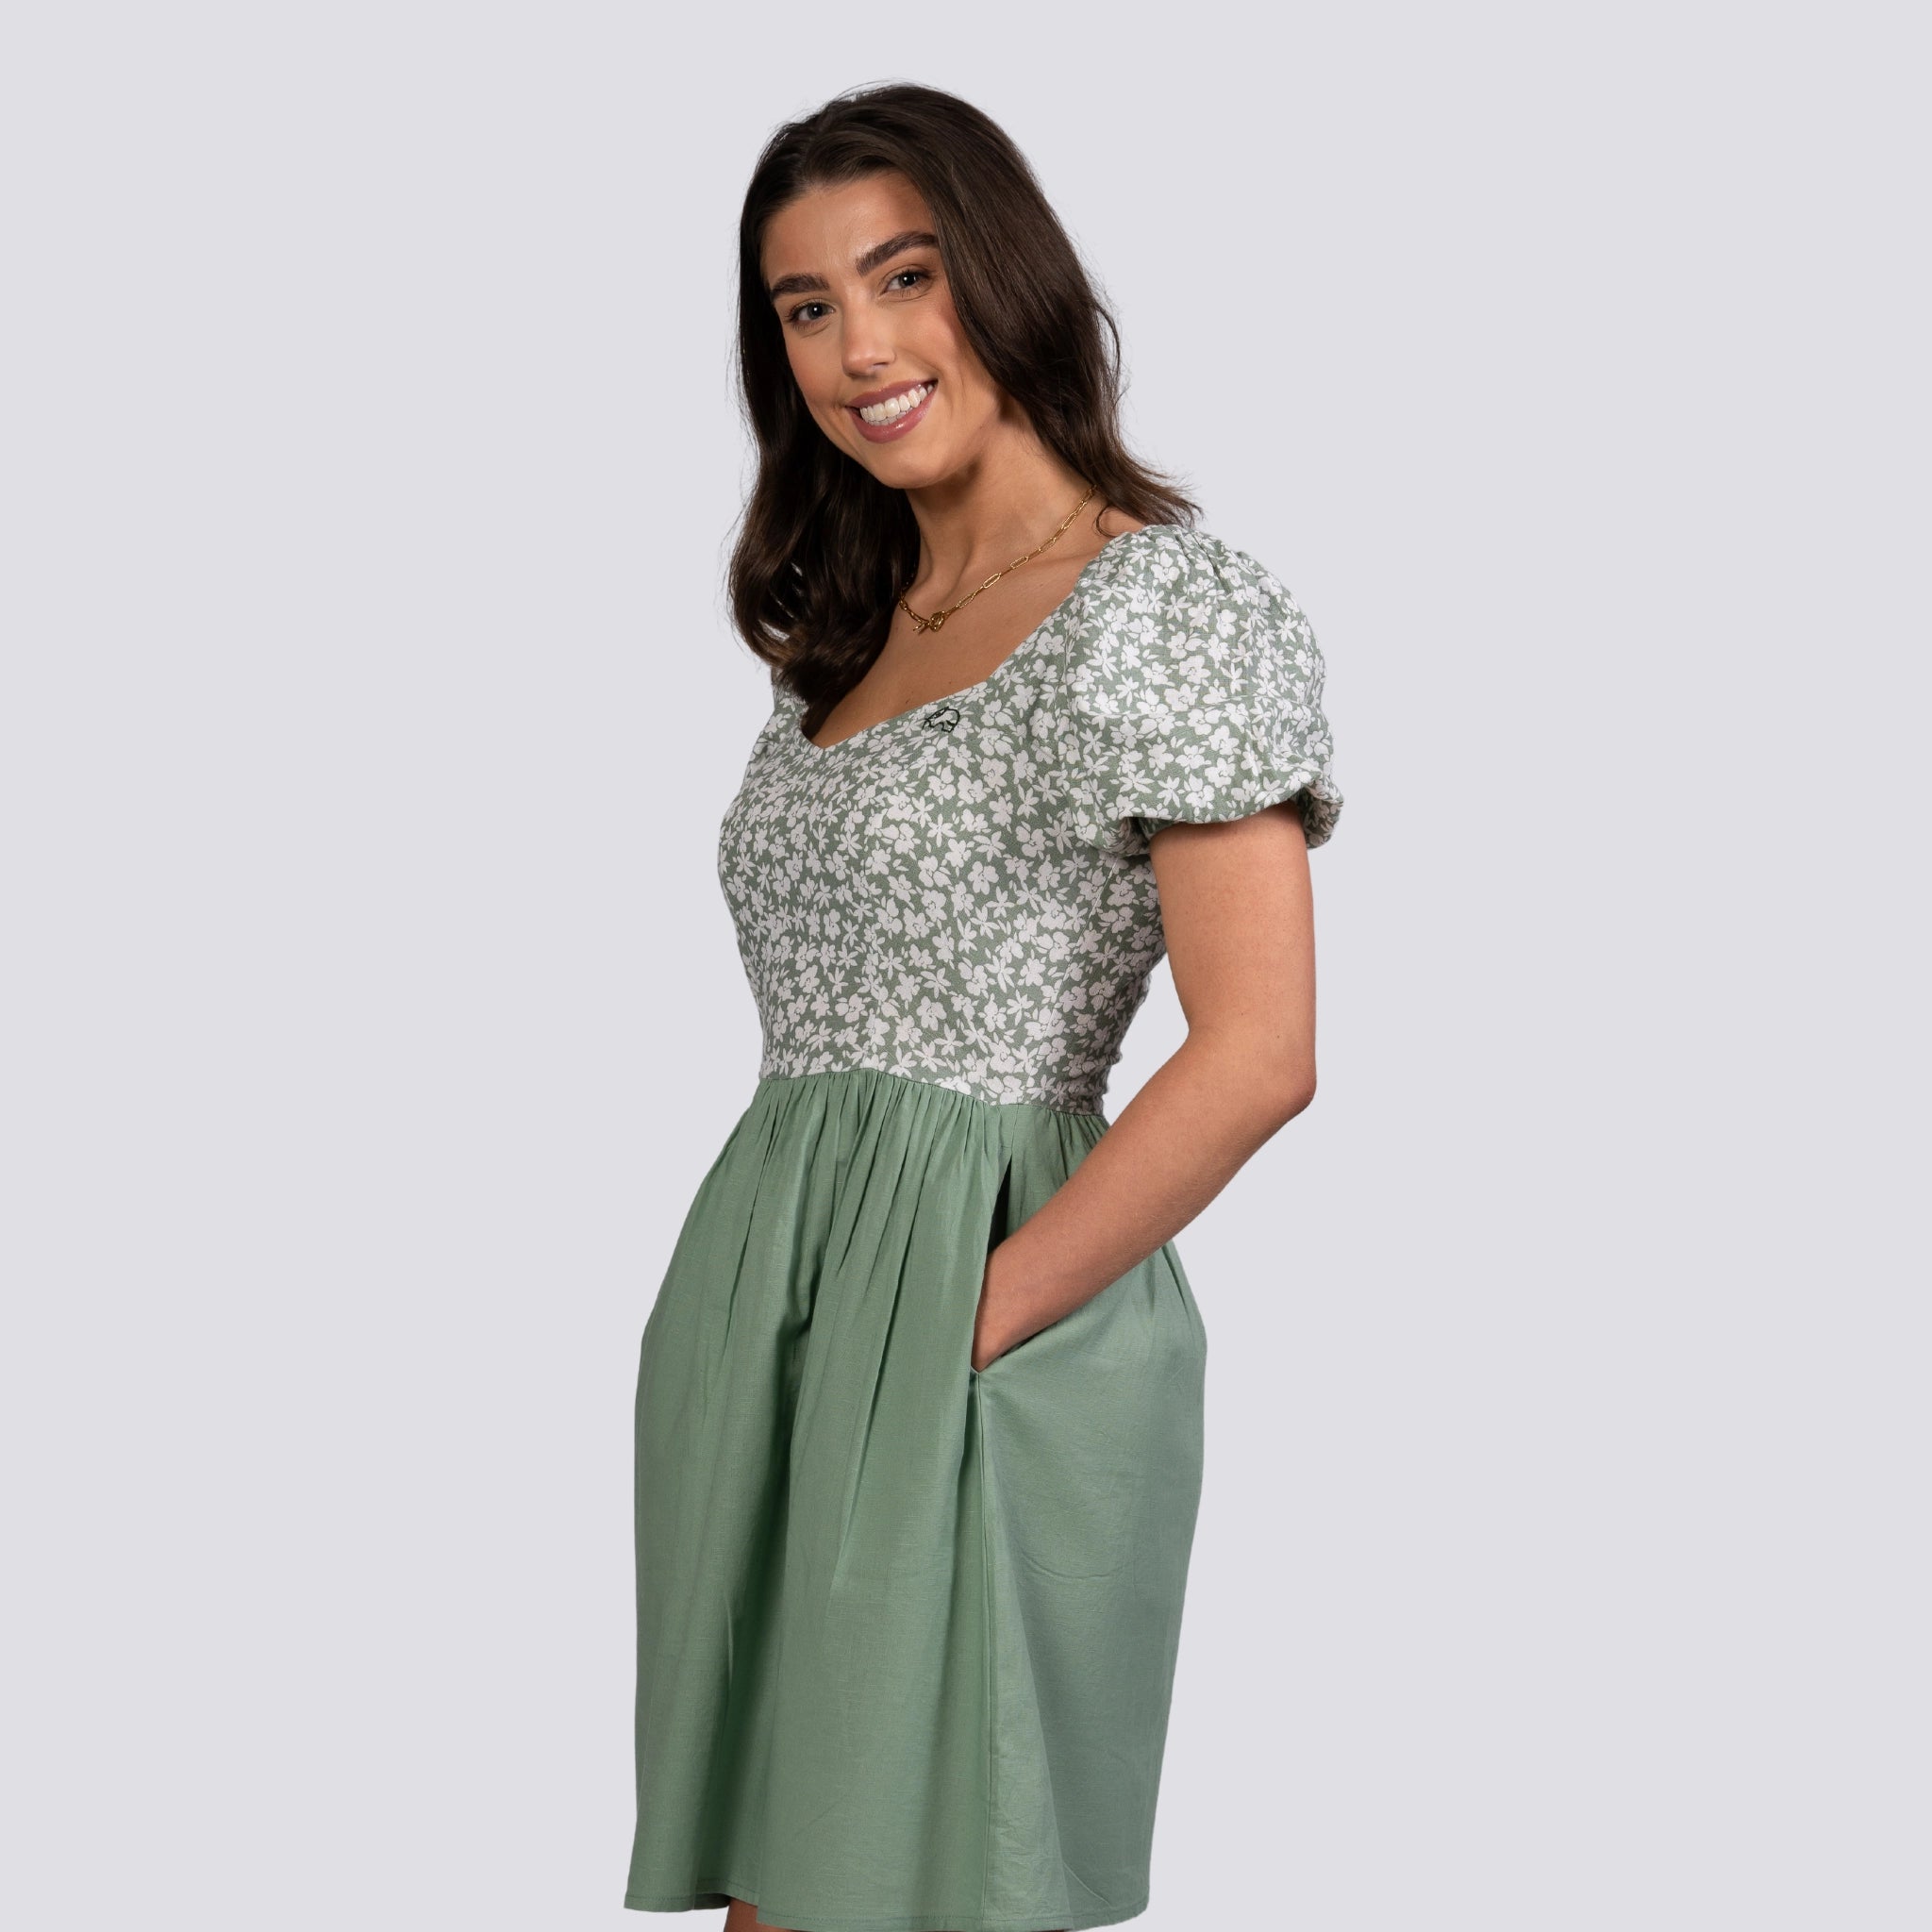 A smiling young woman wearing a Karee Sirocco Blooms Green Frock Dress with a knee-length hemline, standing against a light gray background.